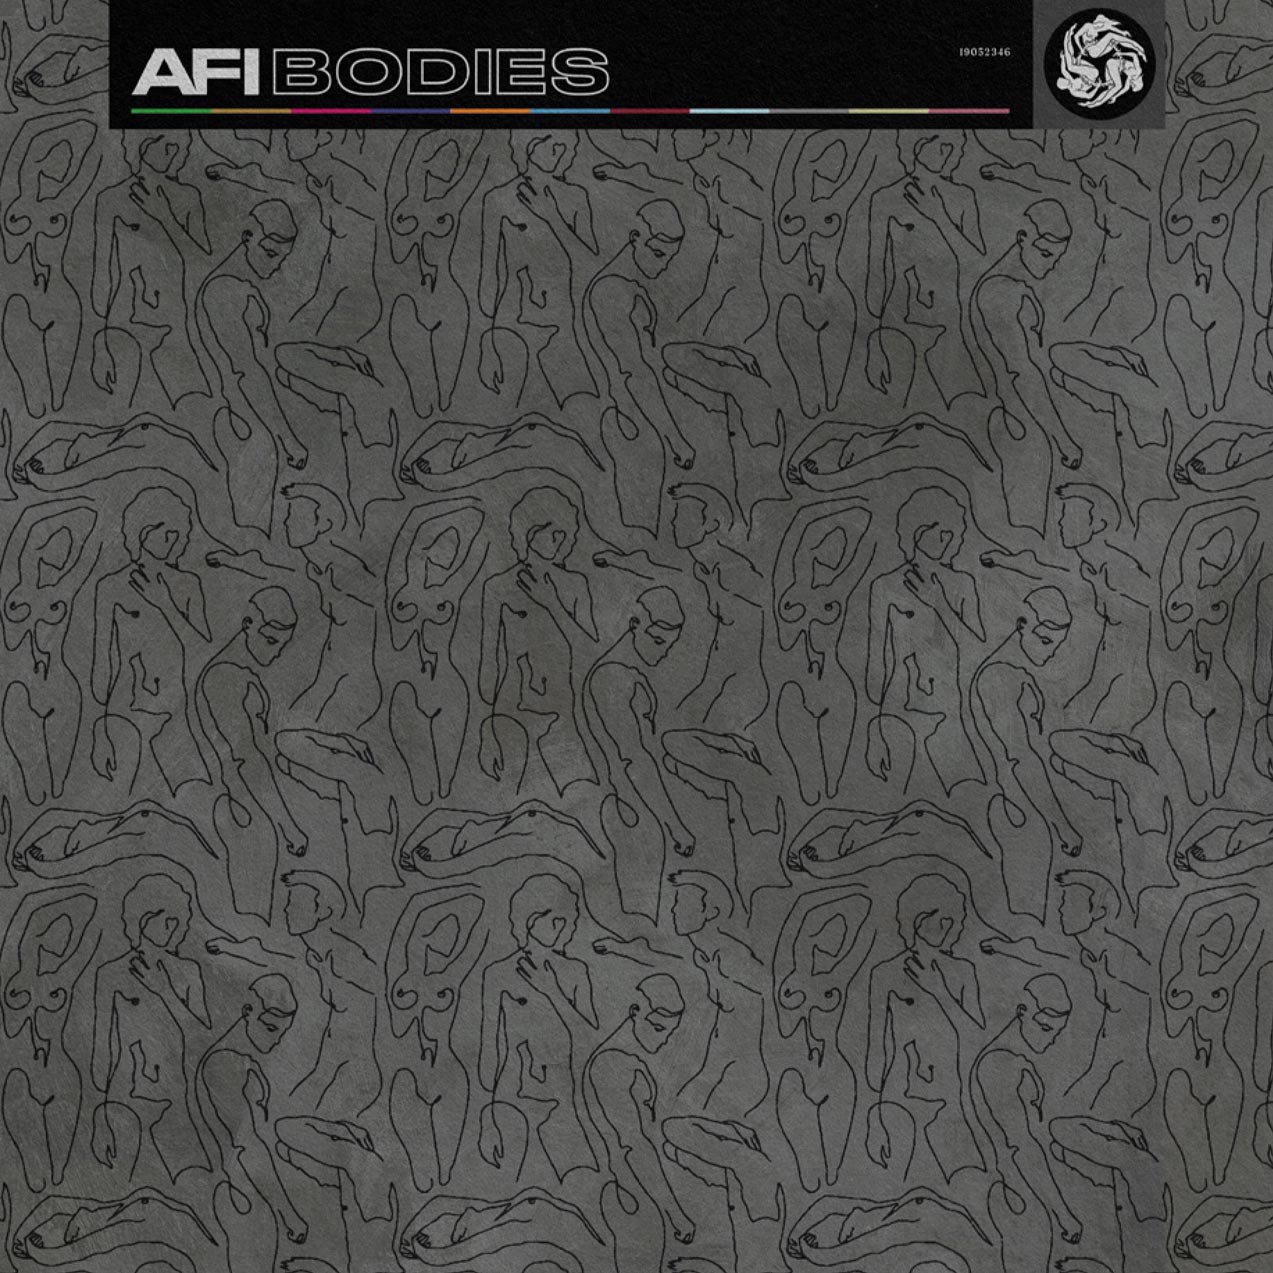 AFI - Bodies - Out Now